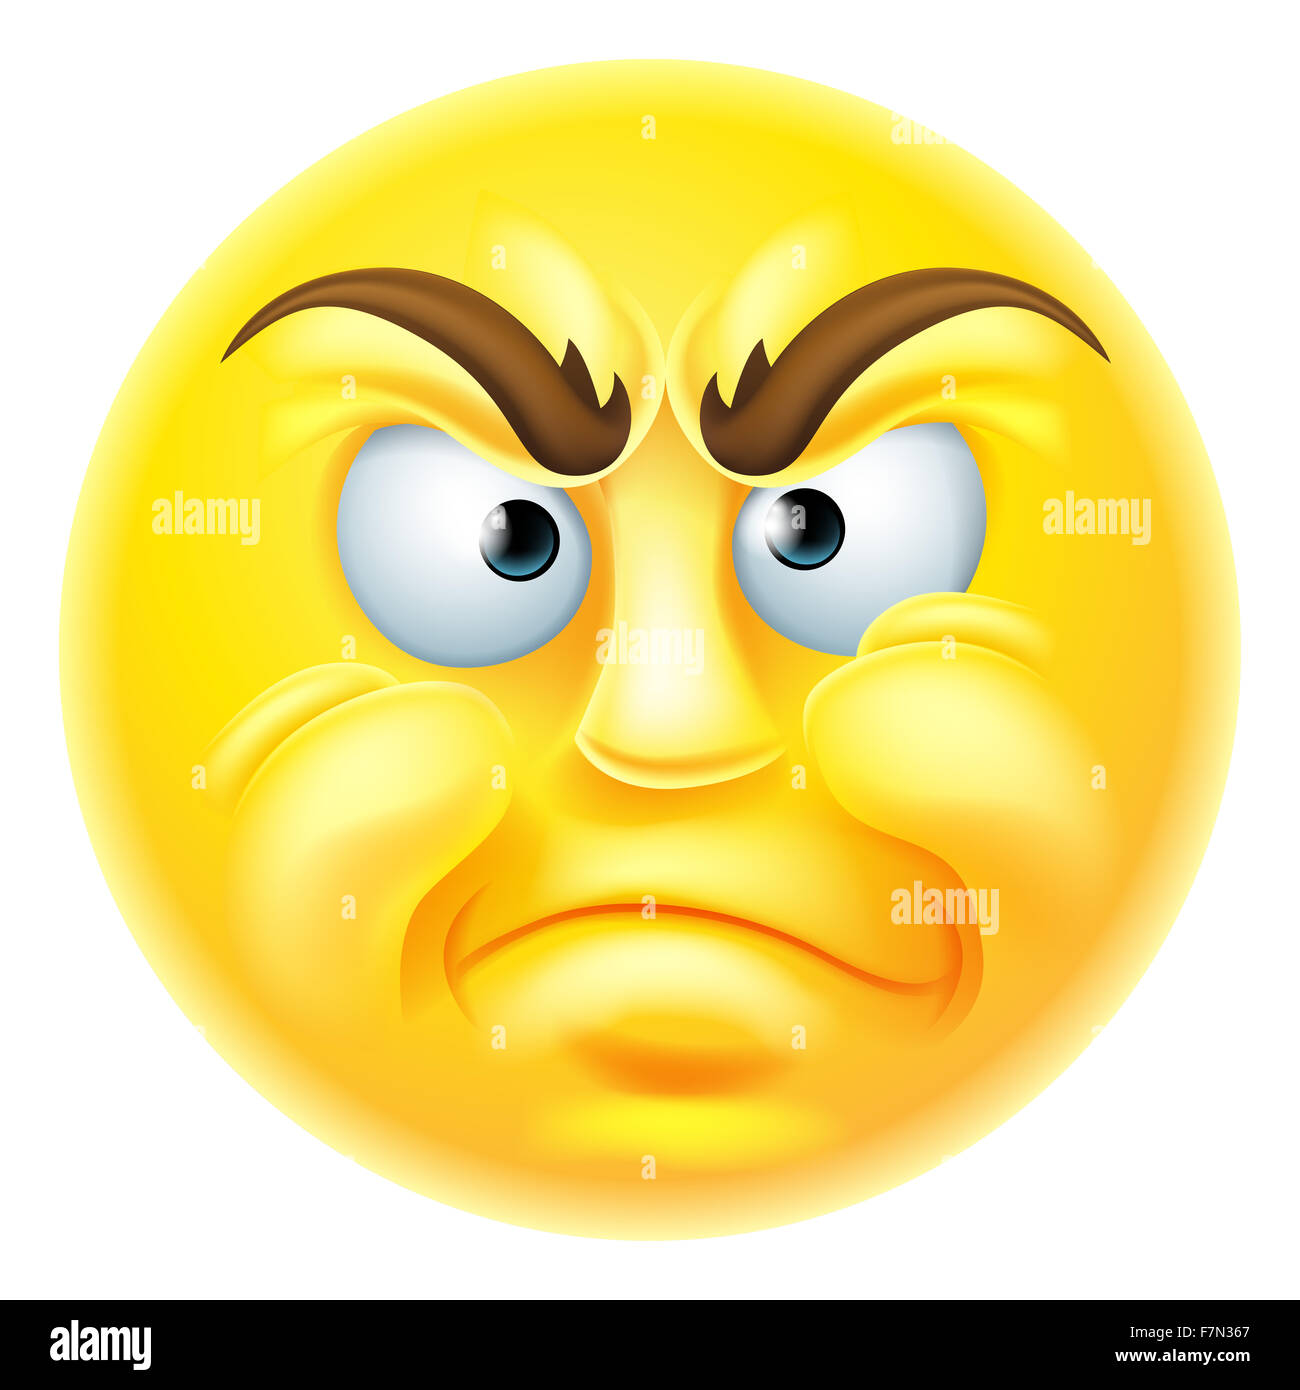 Angry or disapproving looking emoticon emoji character Stock Photo